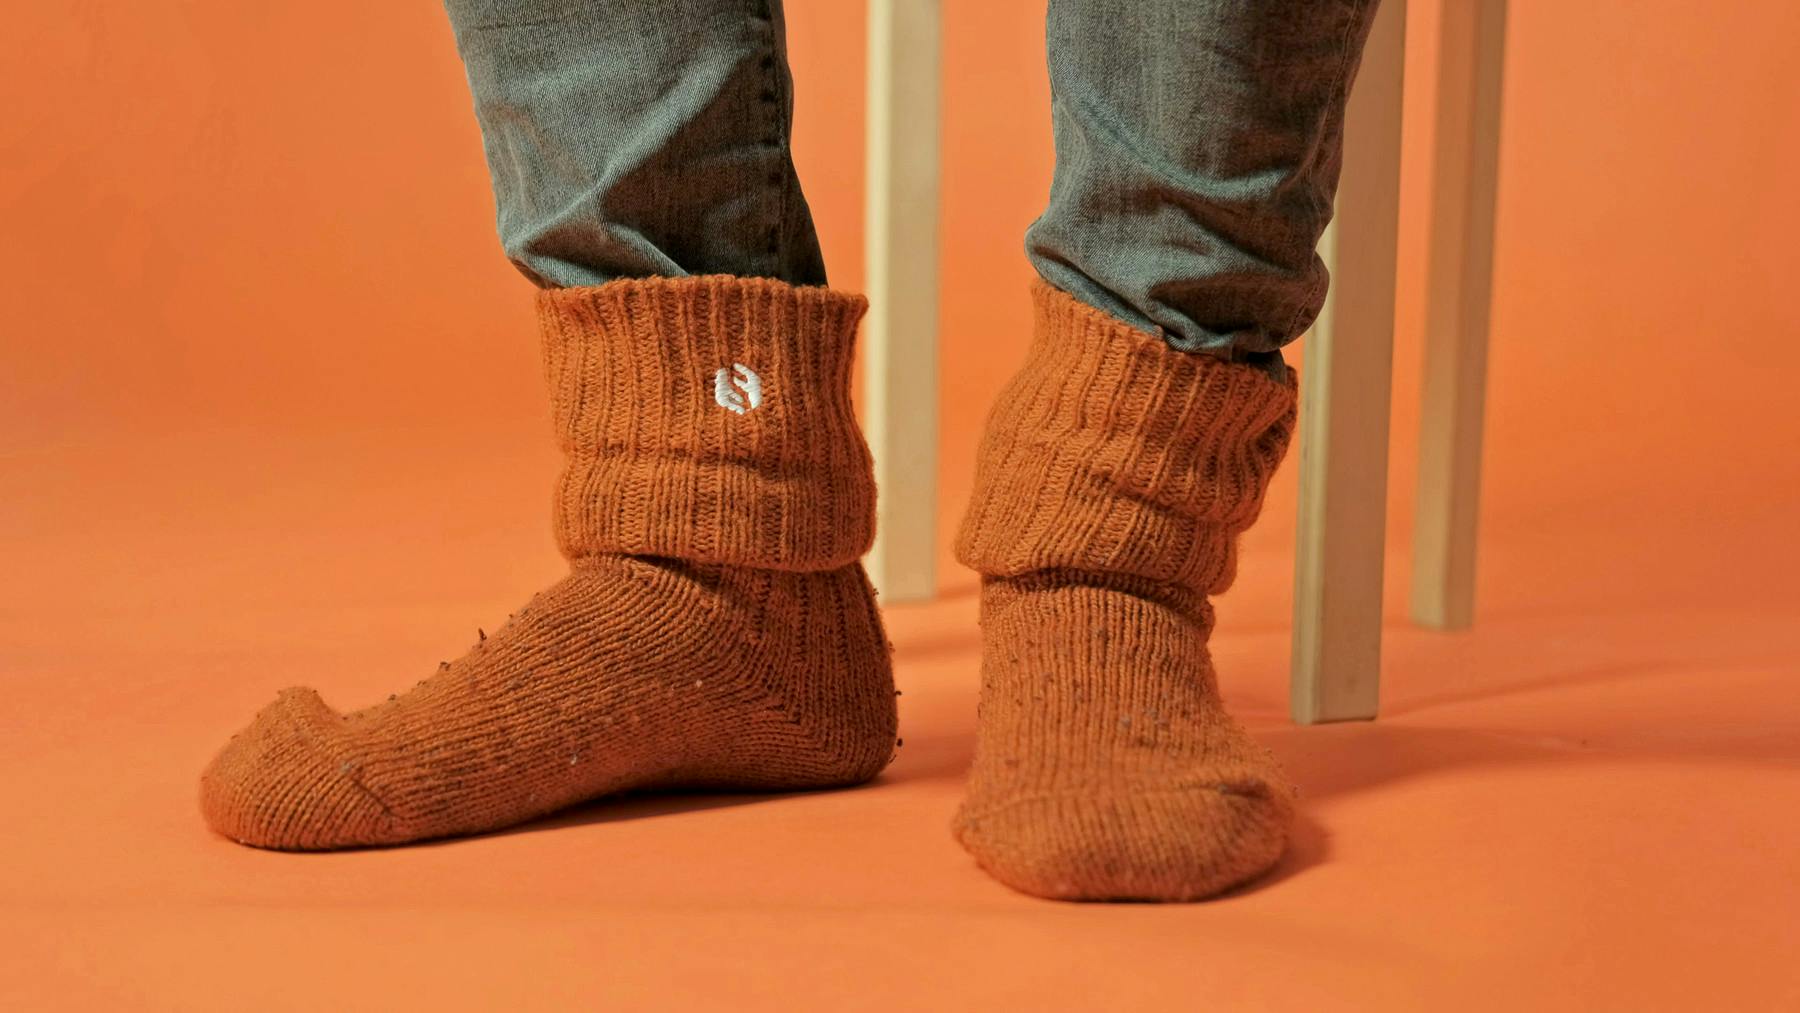 Two feet wearing Sharetribe wool socks on an orange background. Behind the feet, legs of a wooden chair.